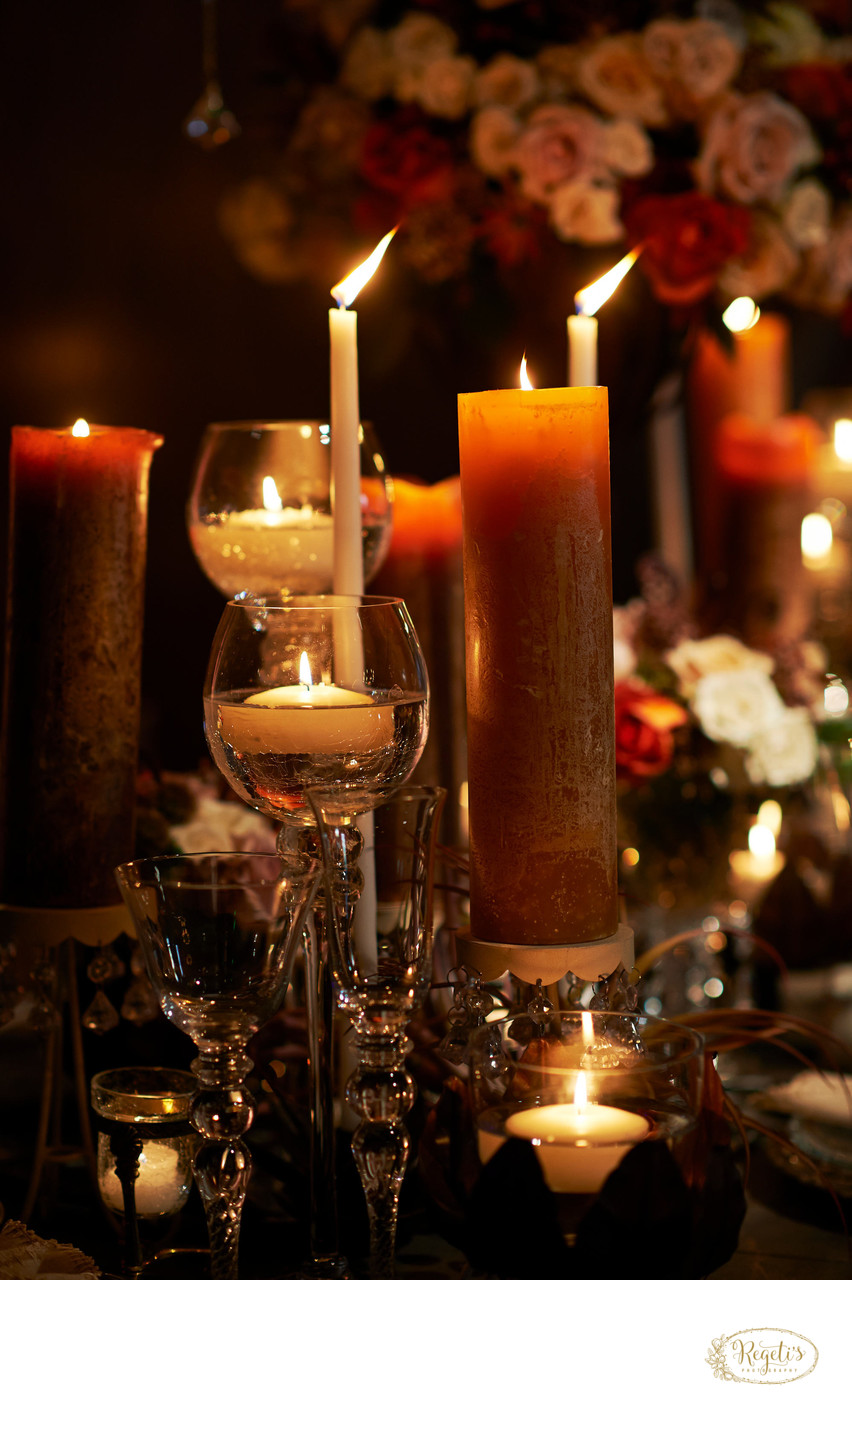 Centerpieces & Candles at a Reception